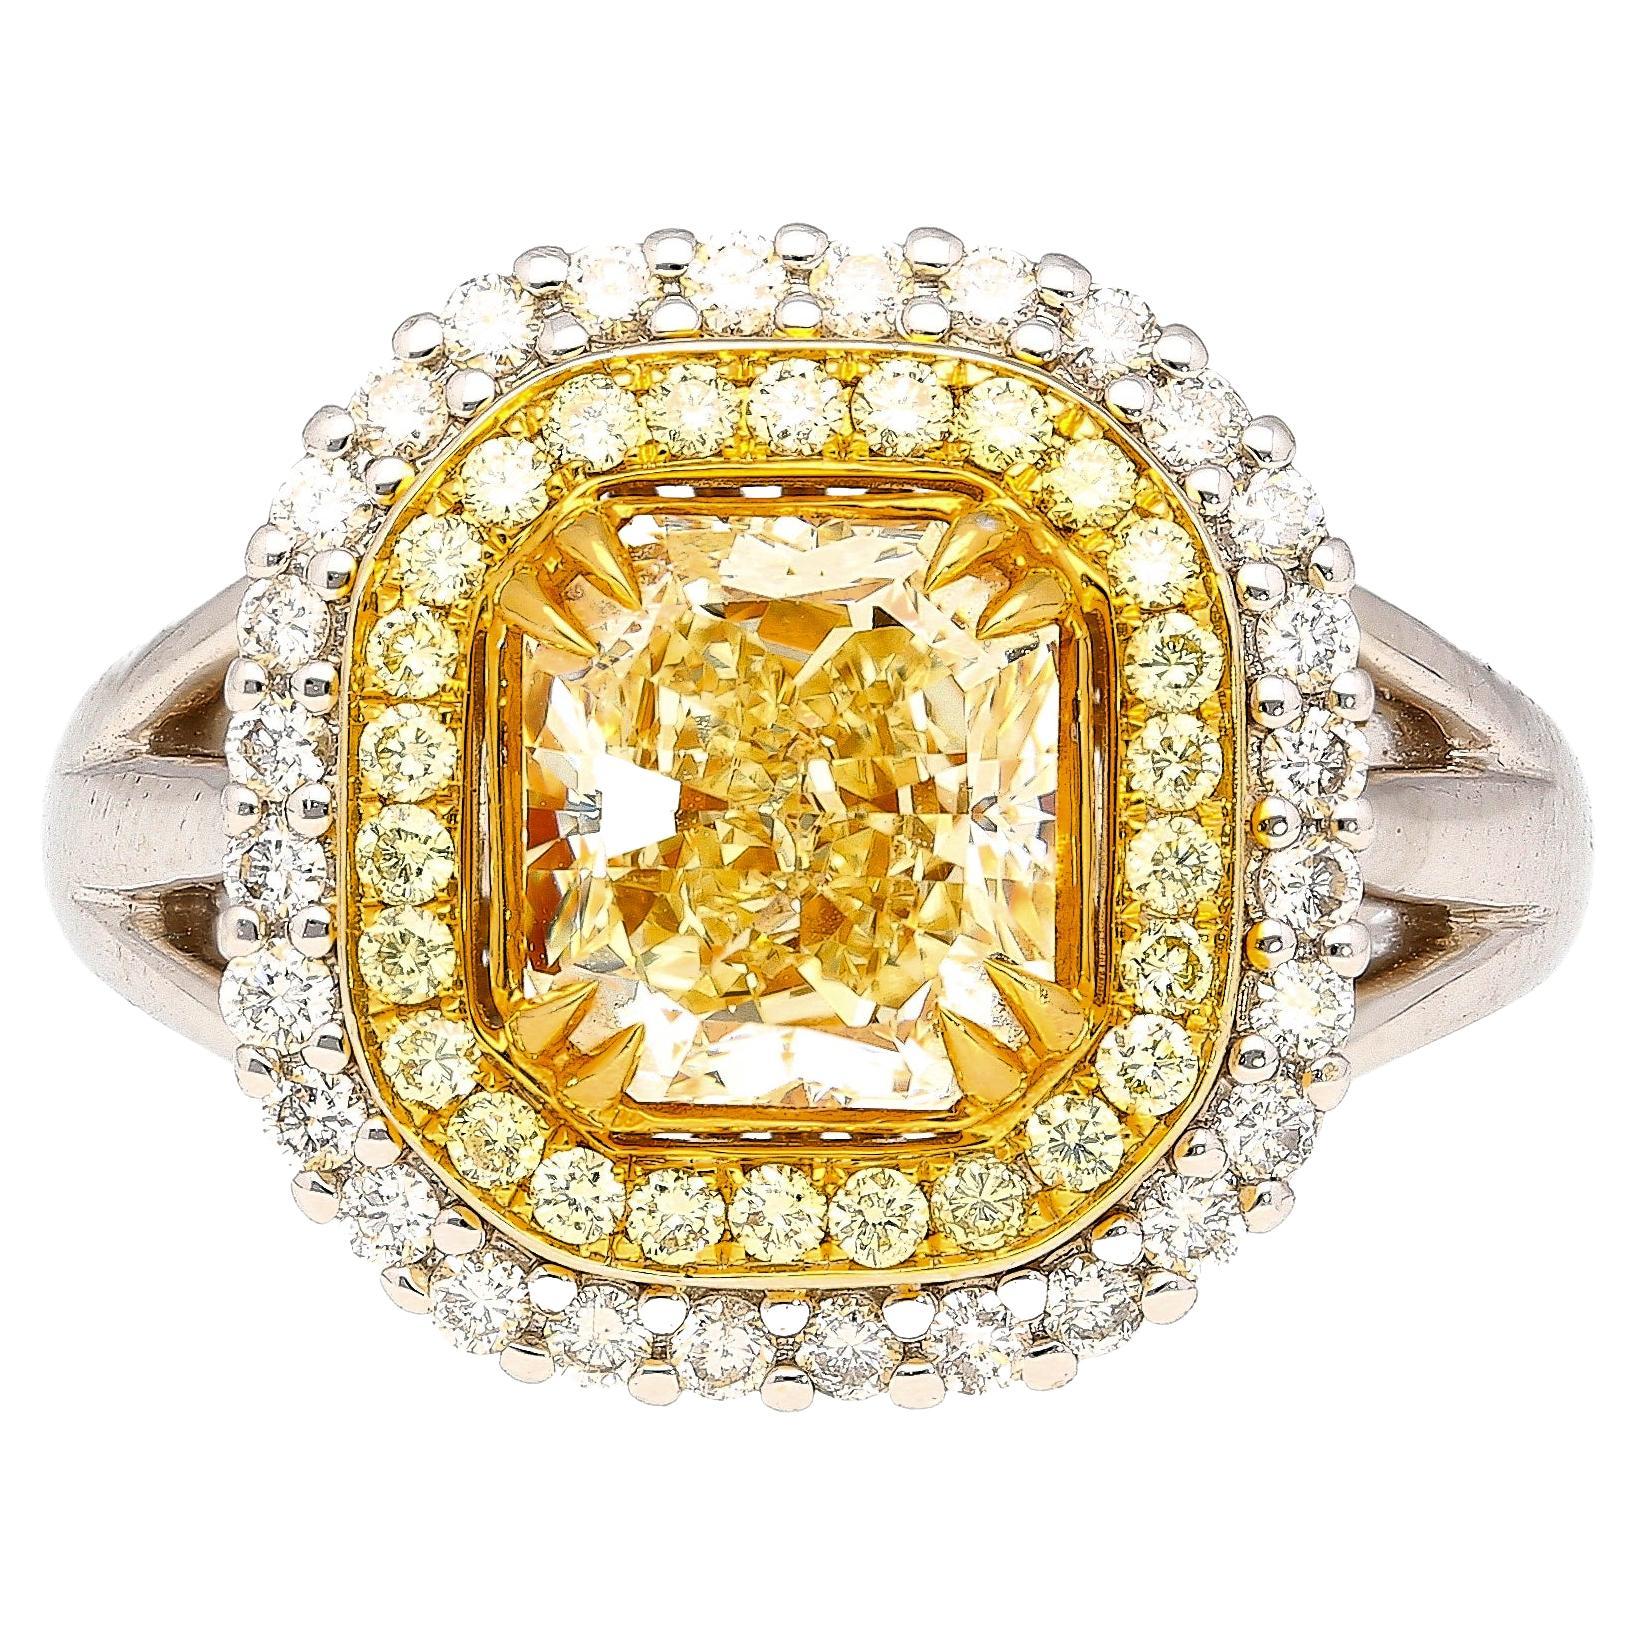 GIA Certified 2.79 Carat Fancy Colored Radiant Cut Diamond 18k Gold Ring